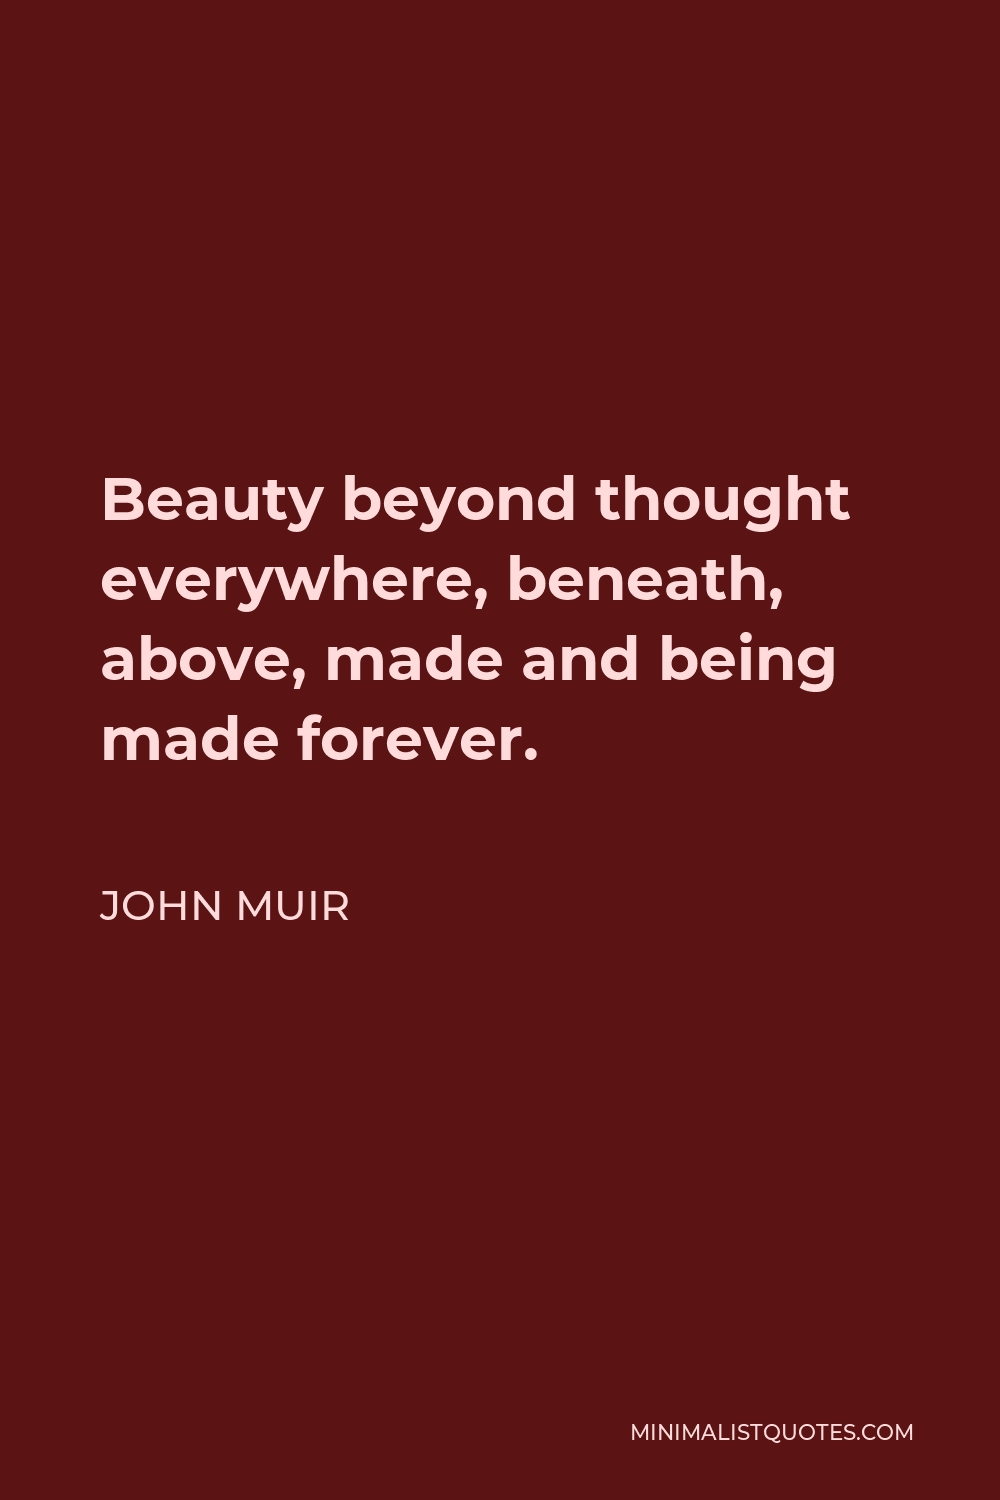 John Muir Quote - Beauty beyond thought everywhere, beneath, above, made and being made forever.